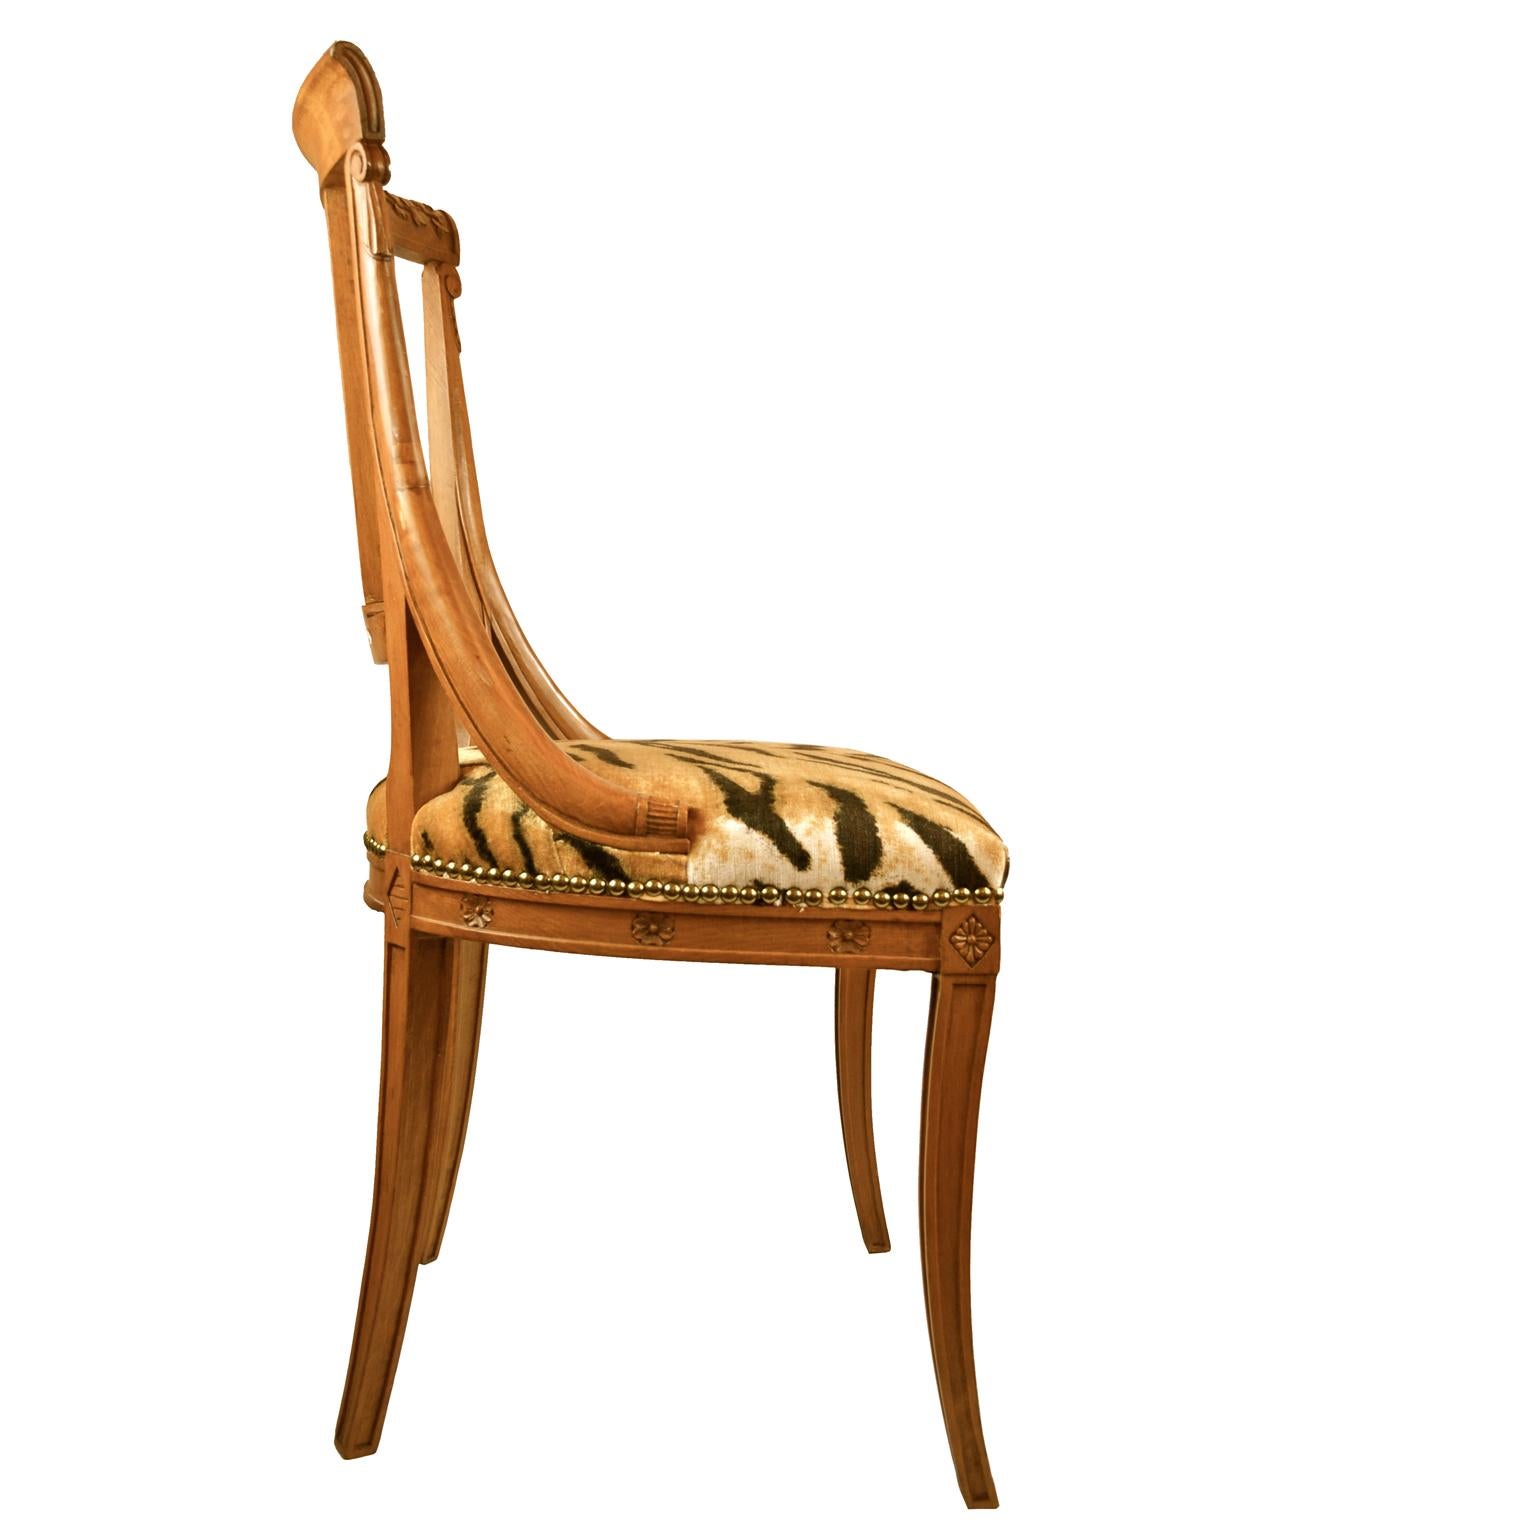 A single neoclassical open chair in crisply carved fruitwood, the back having a decorated carved urn, the top rail with carved palmettes upholstered in modern tiger velvet.